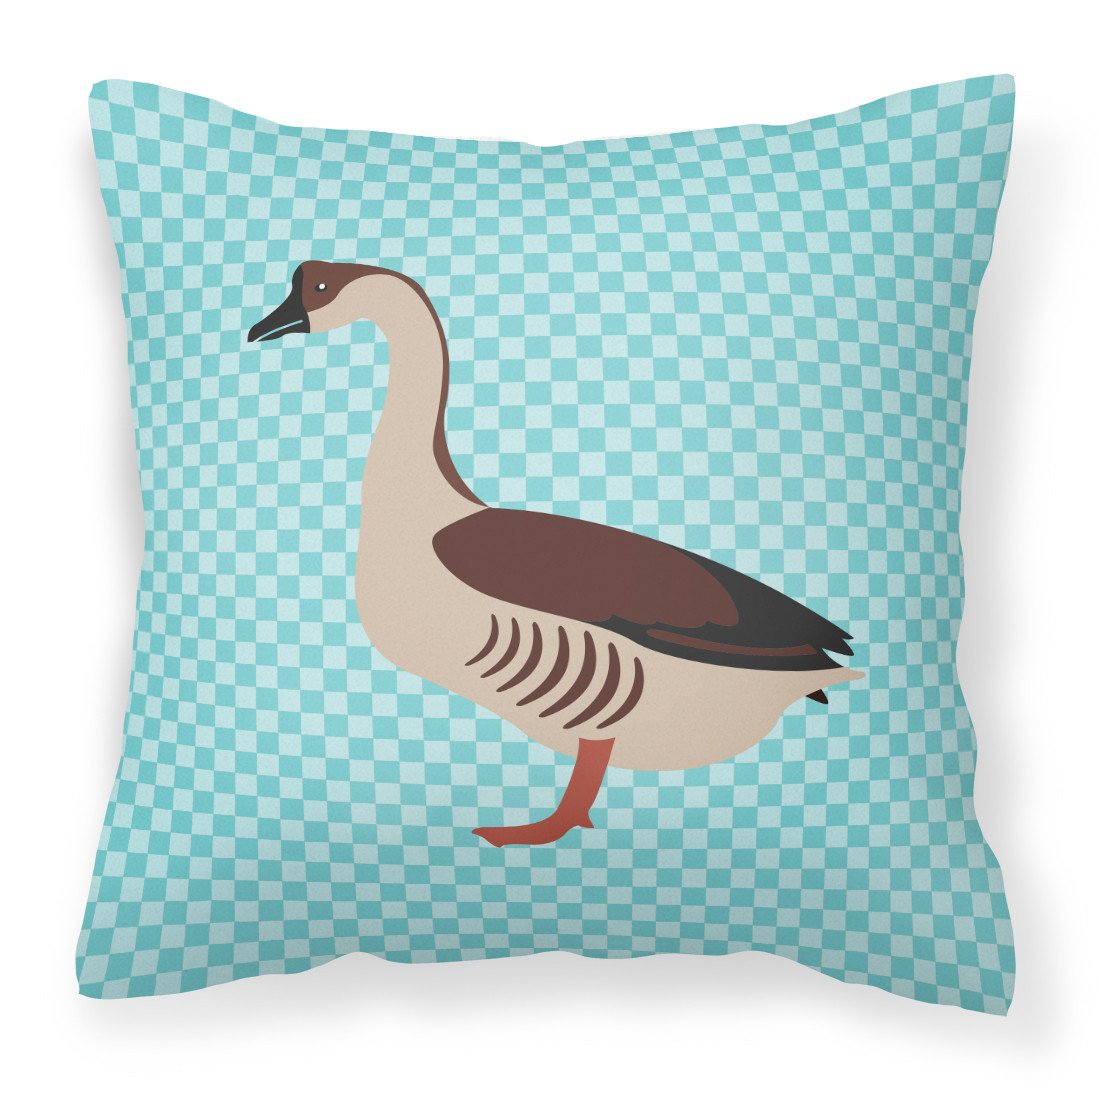 Chinese Goose Blue Check Fabric Decorative Pillow BB8070PW1818 by Caroline's Treasures